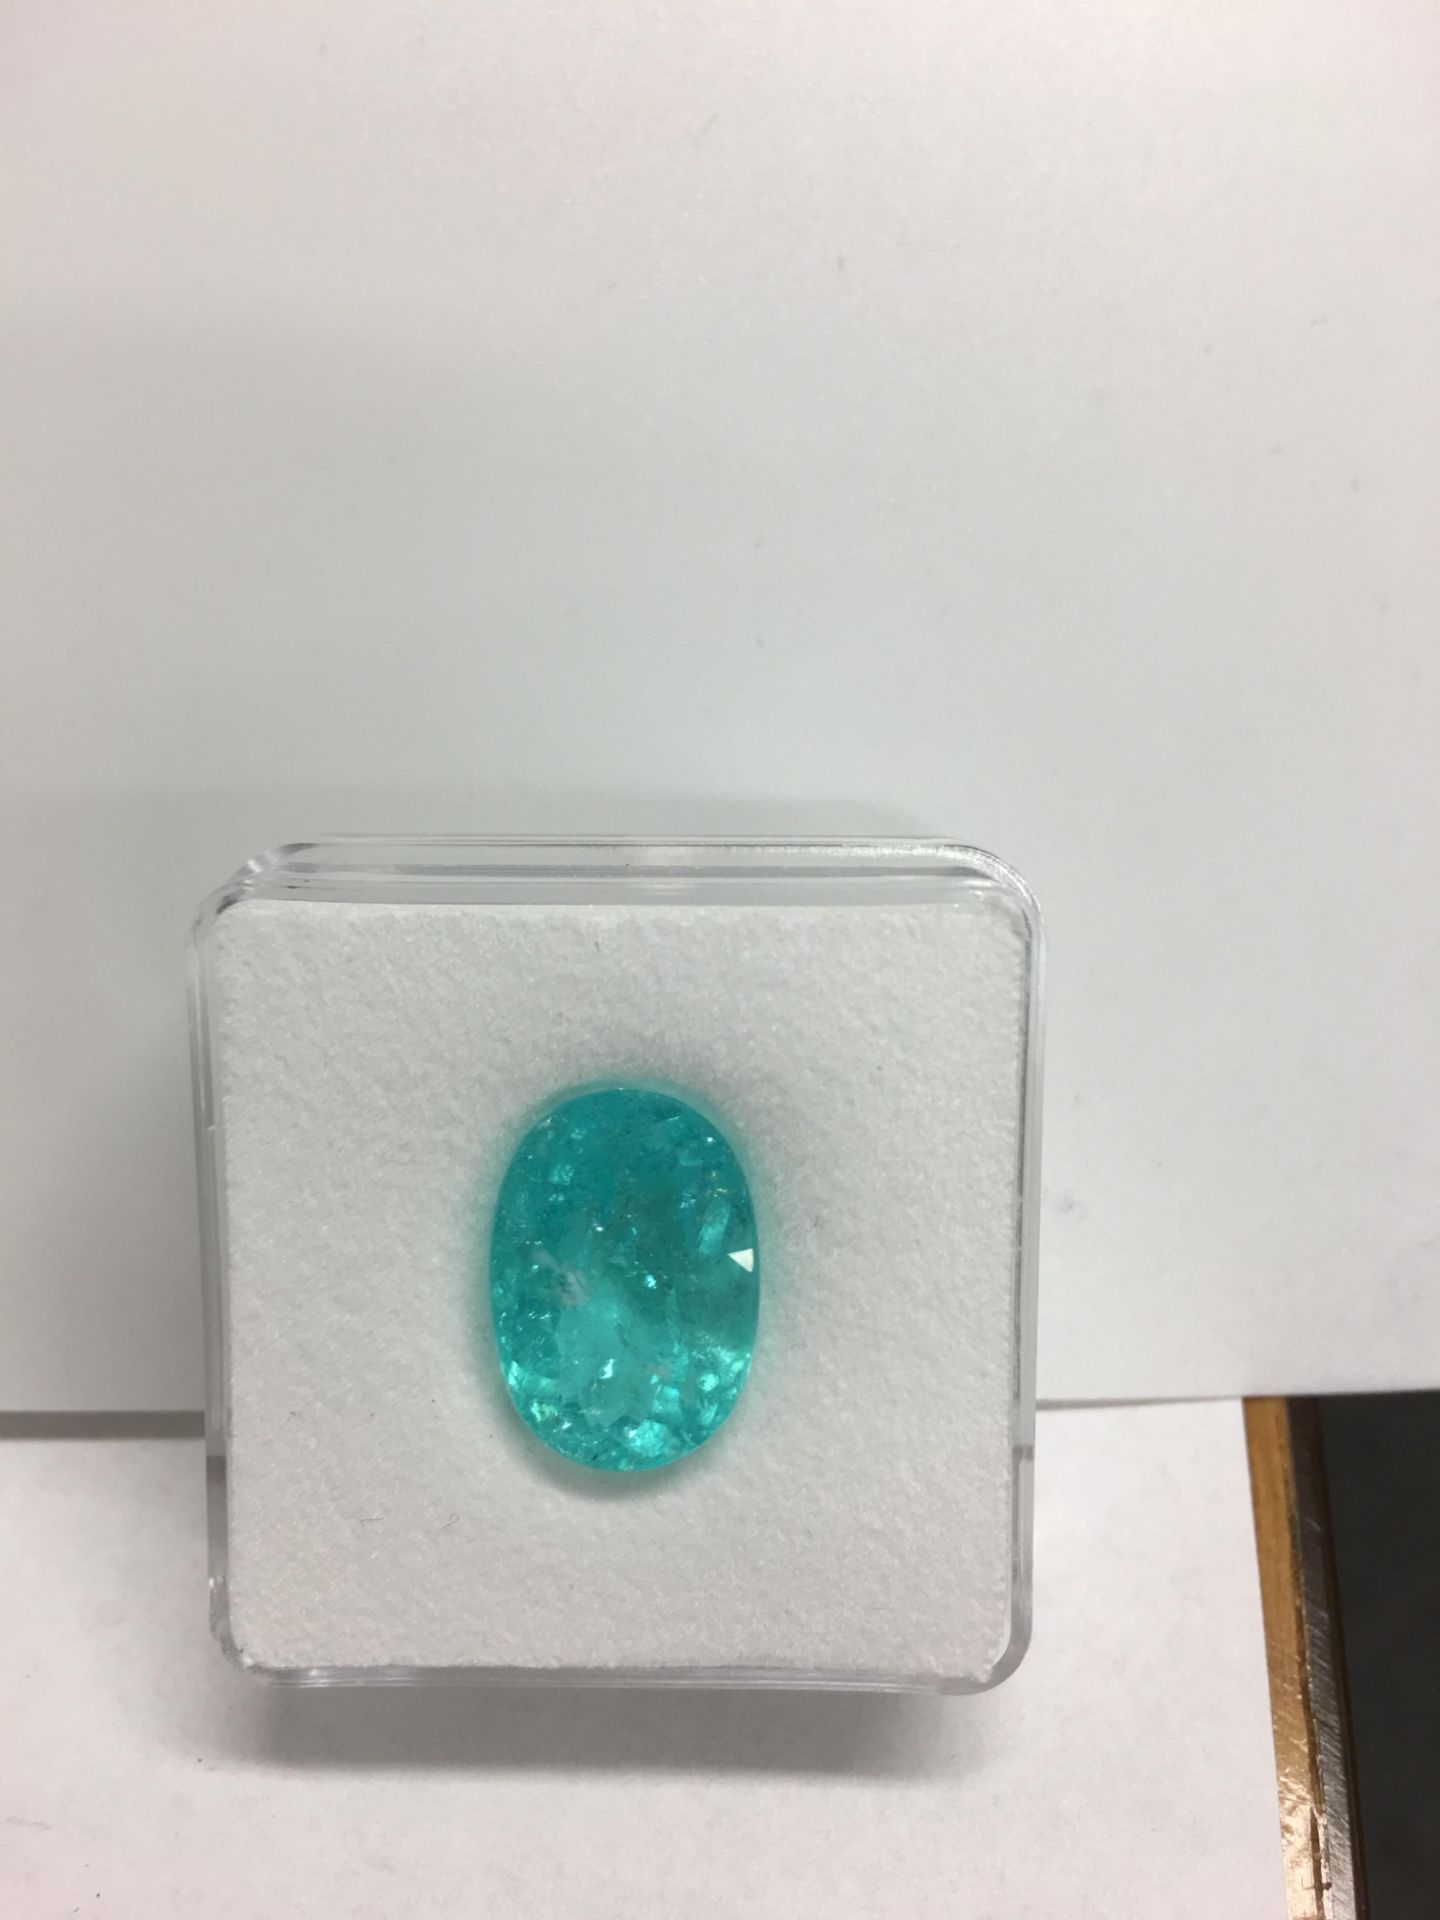 11.05ct Paraiba Tourmaline,16.14mmx 11.44mm x7.87mm,AIGS CERTIFICATION. appriasal 39500 - Image 4 of 5